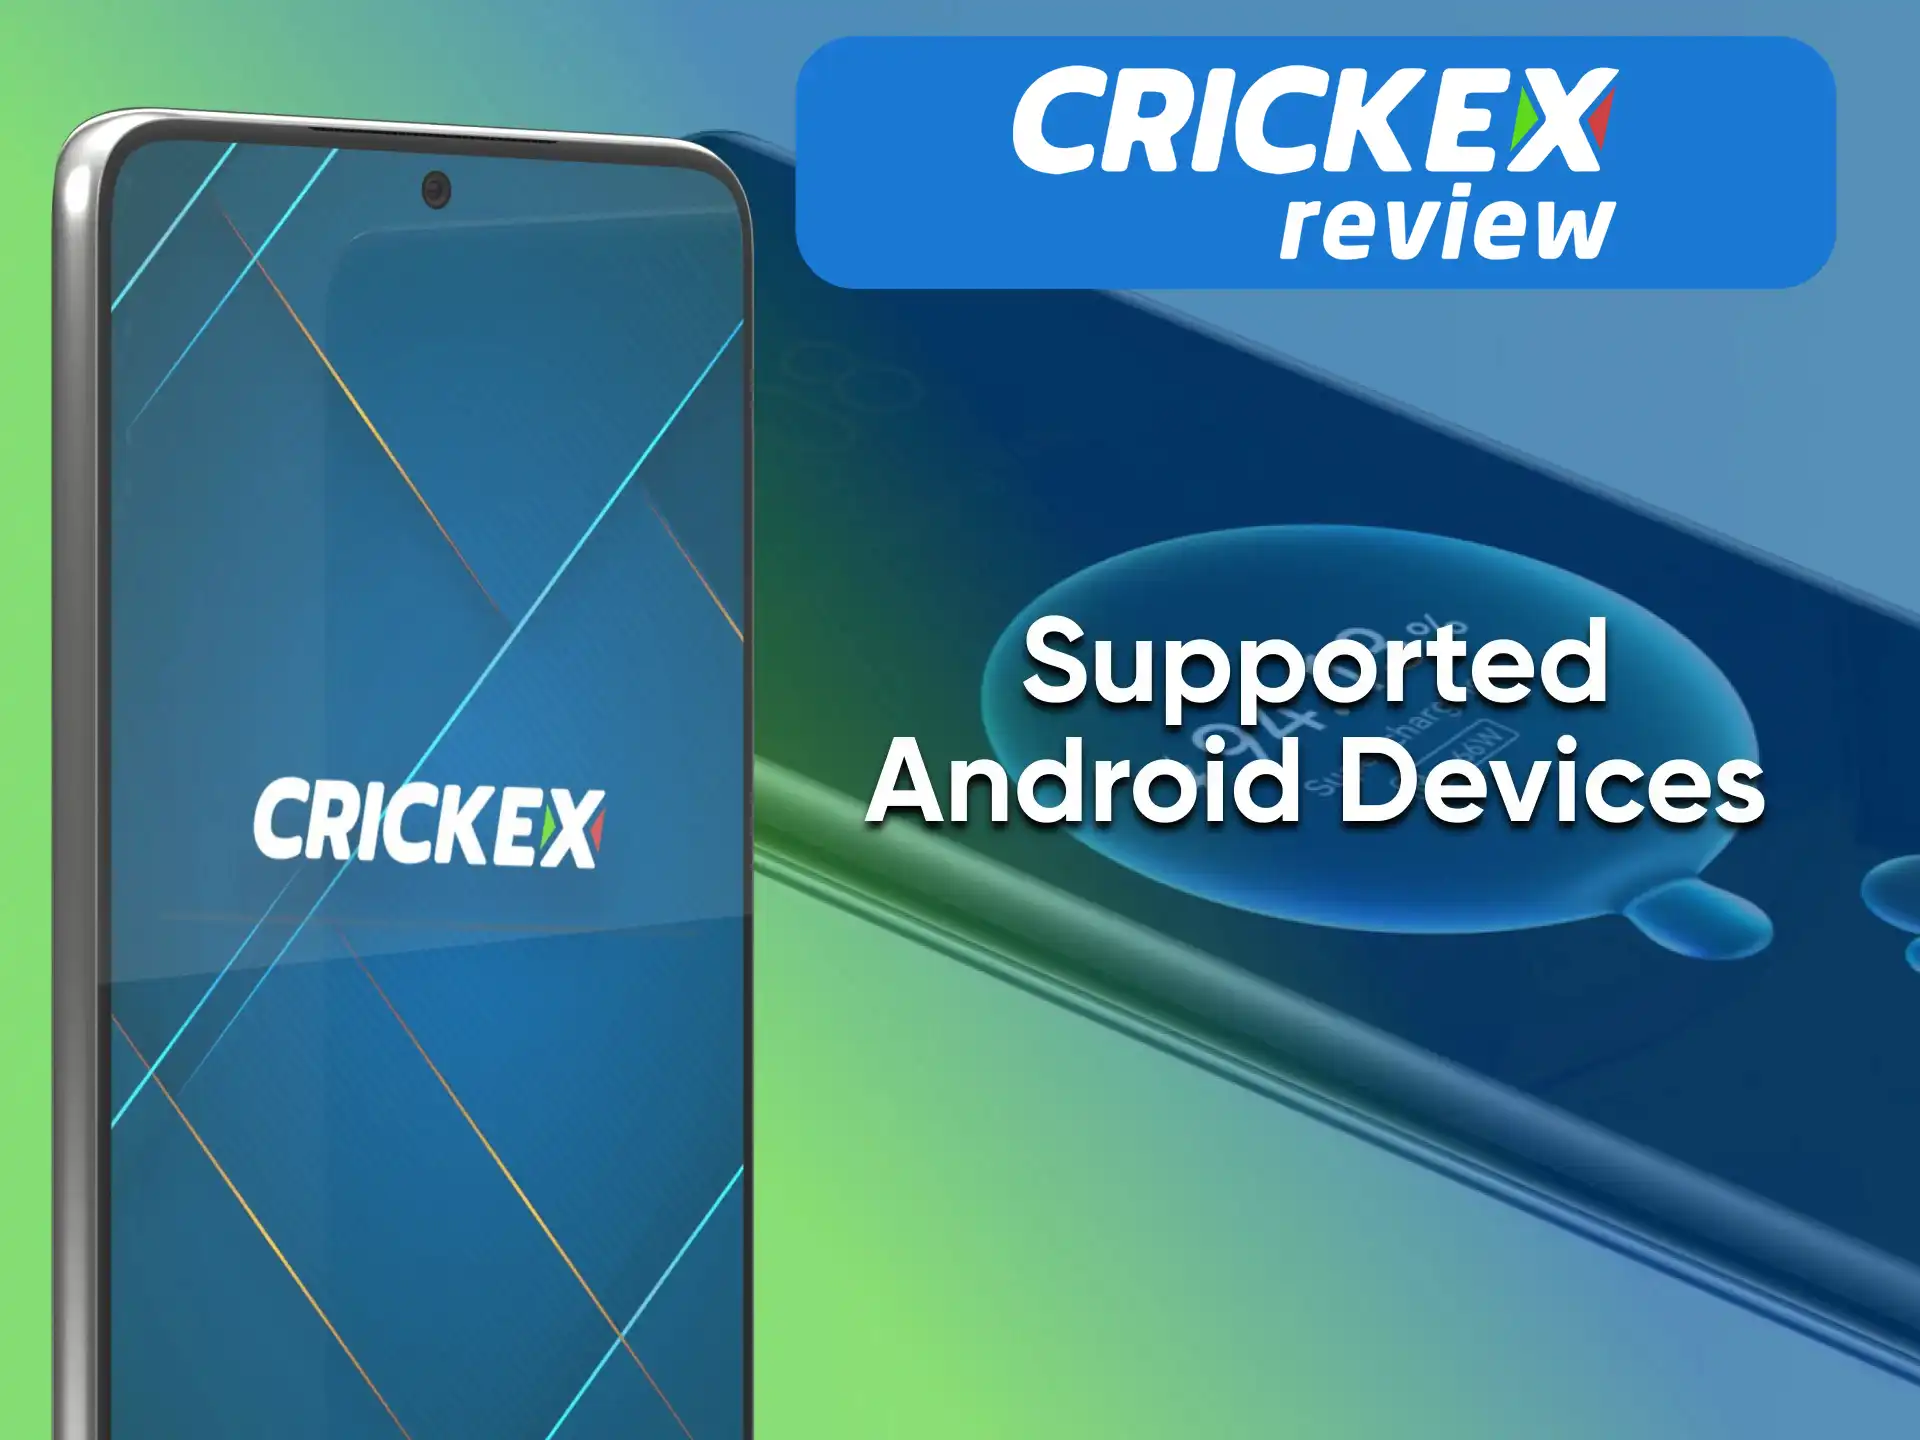 You can use Crickex on your phone.